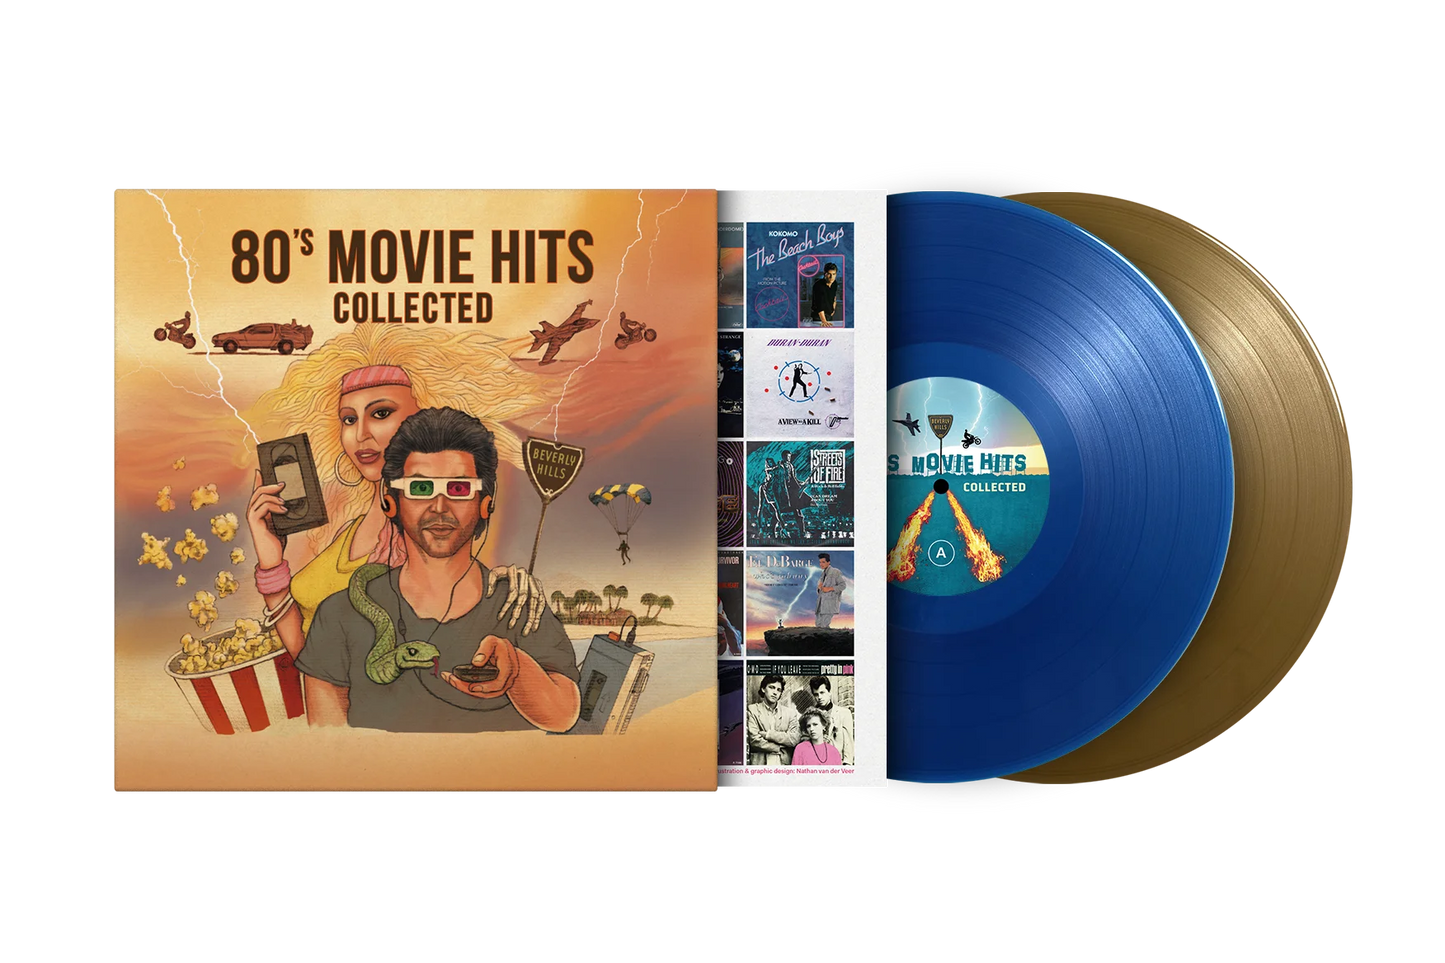 80's Movie Hits Collected (Translucent Blue & Gold)